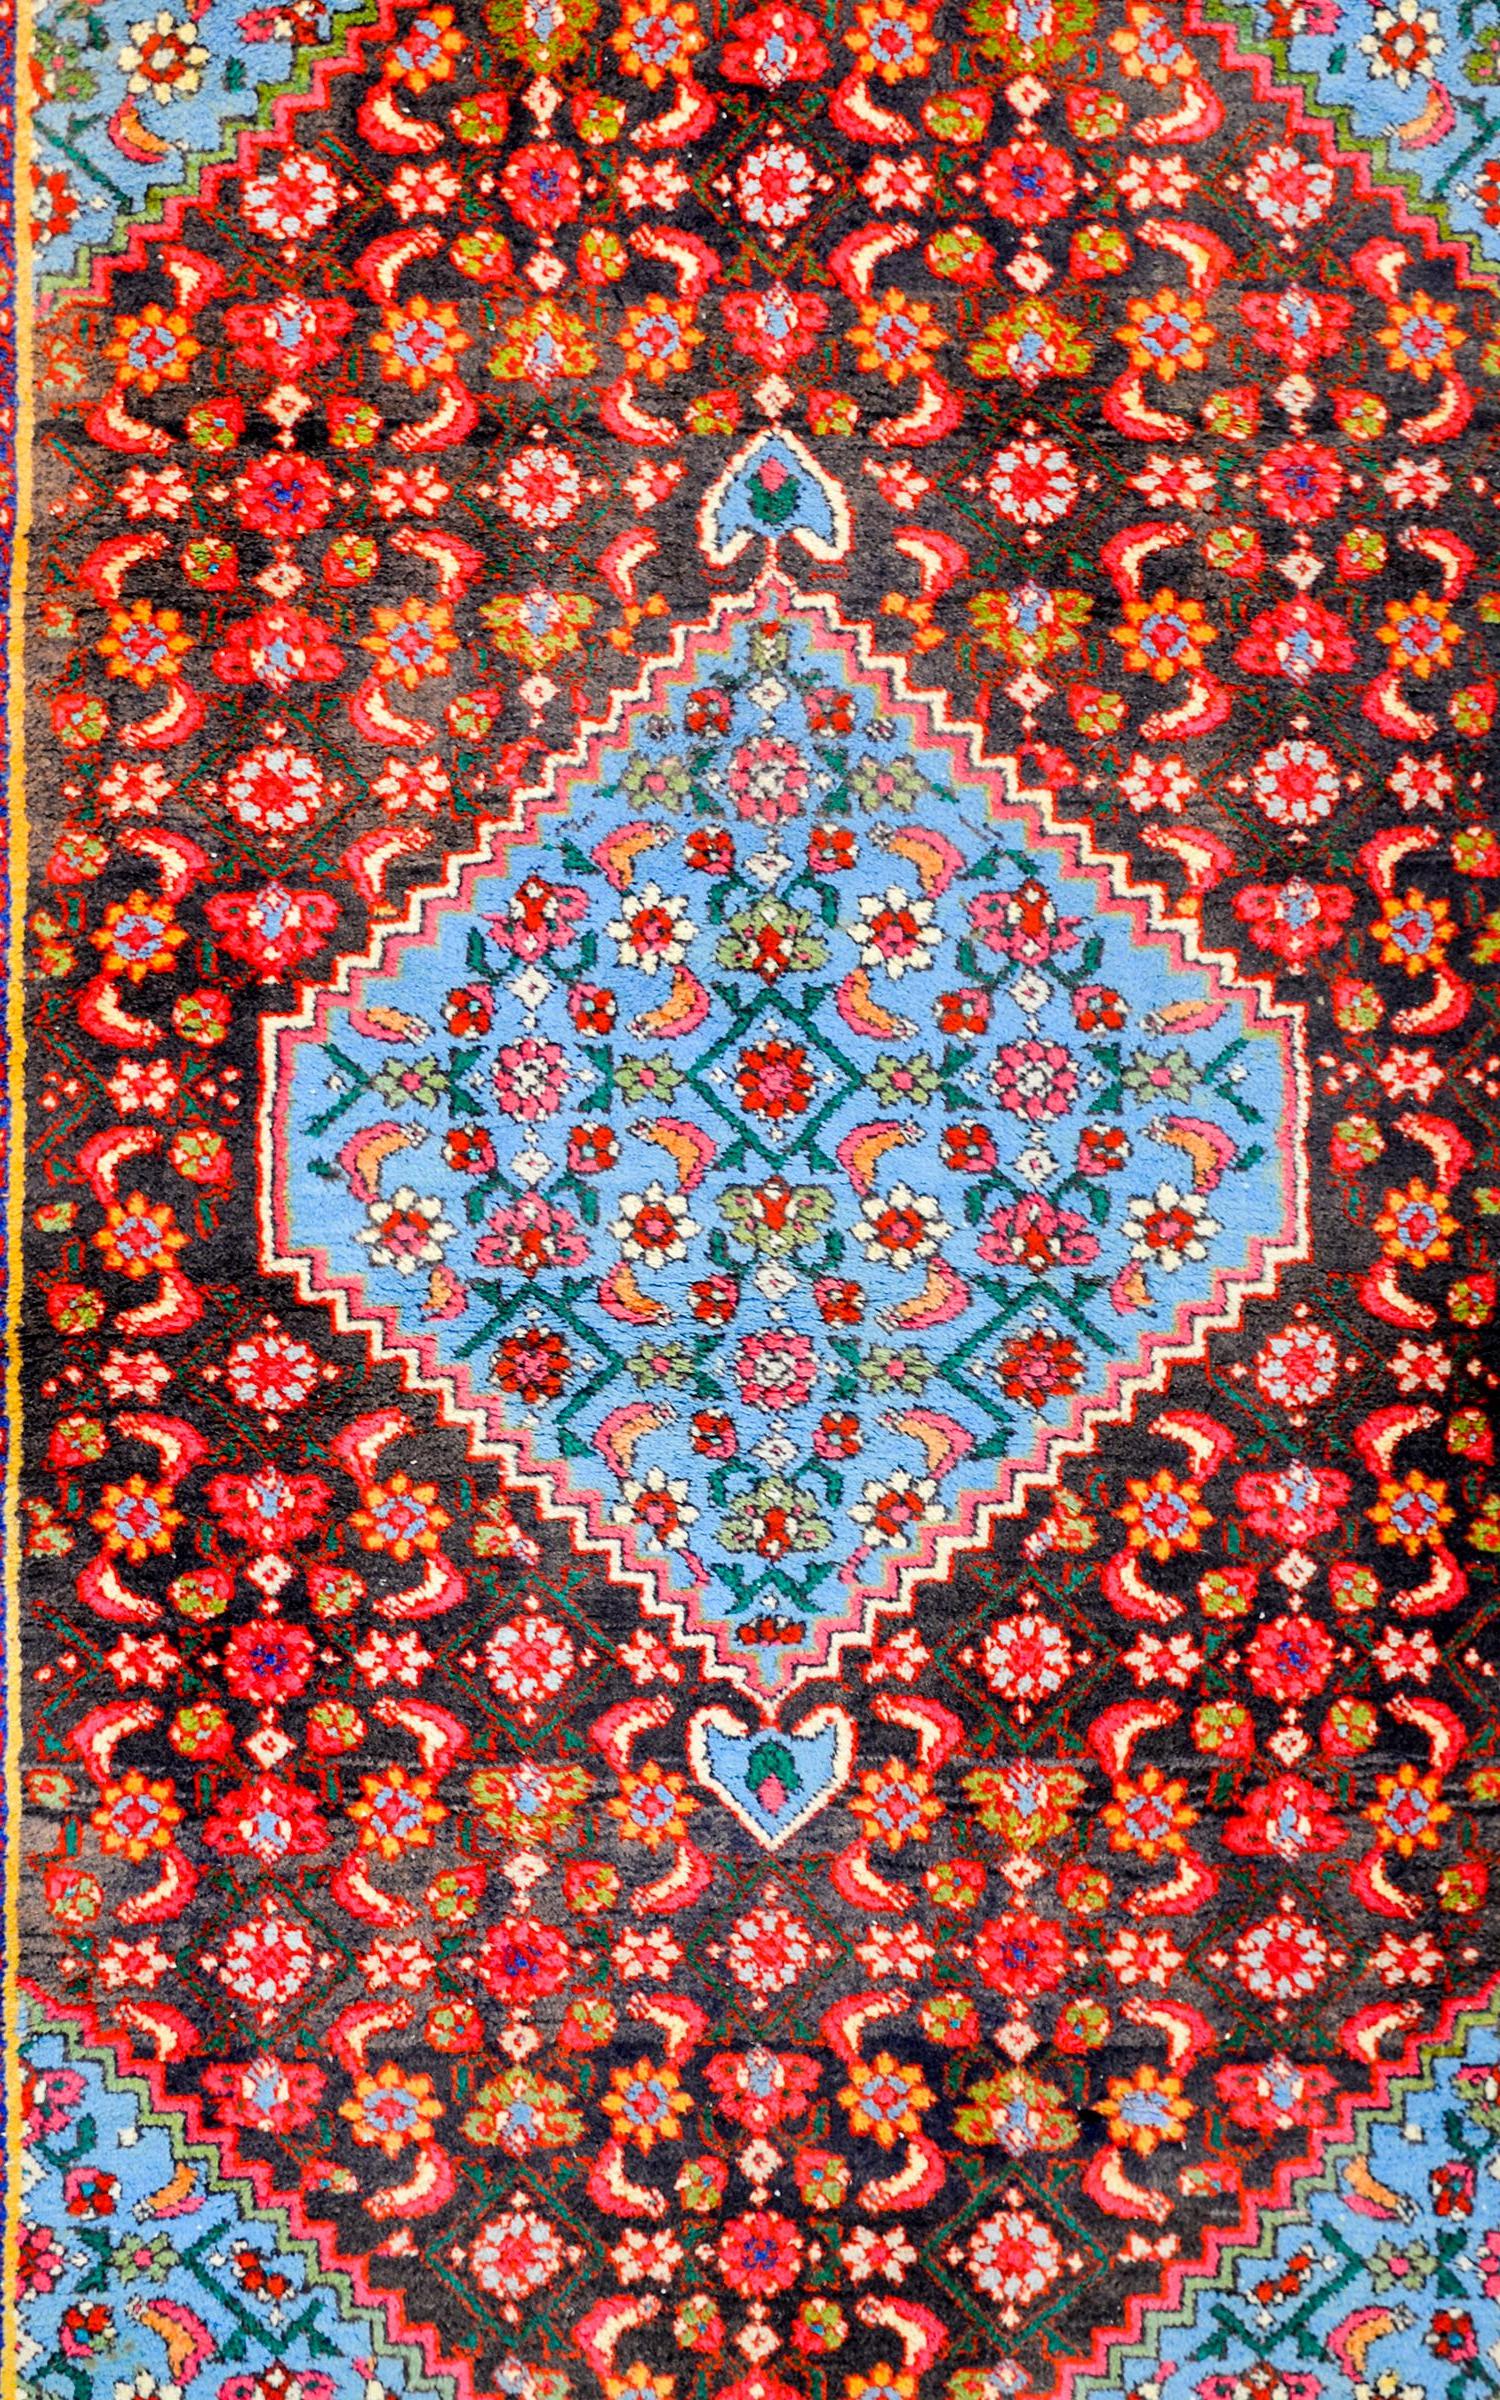 A gorgeous vintage mid-20th century Persian Hamadan rug with a light blue diamond medallion with a floral and leaf trellis pattern, on a similar floral and leaf trellis patterned field on a black ground. The border is exceptional with a bold floral